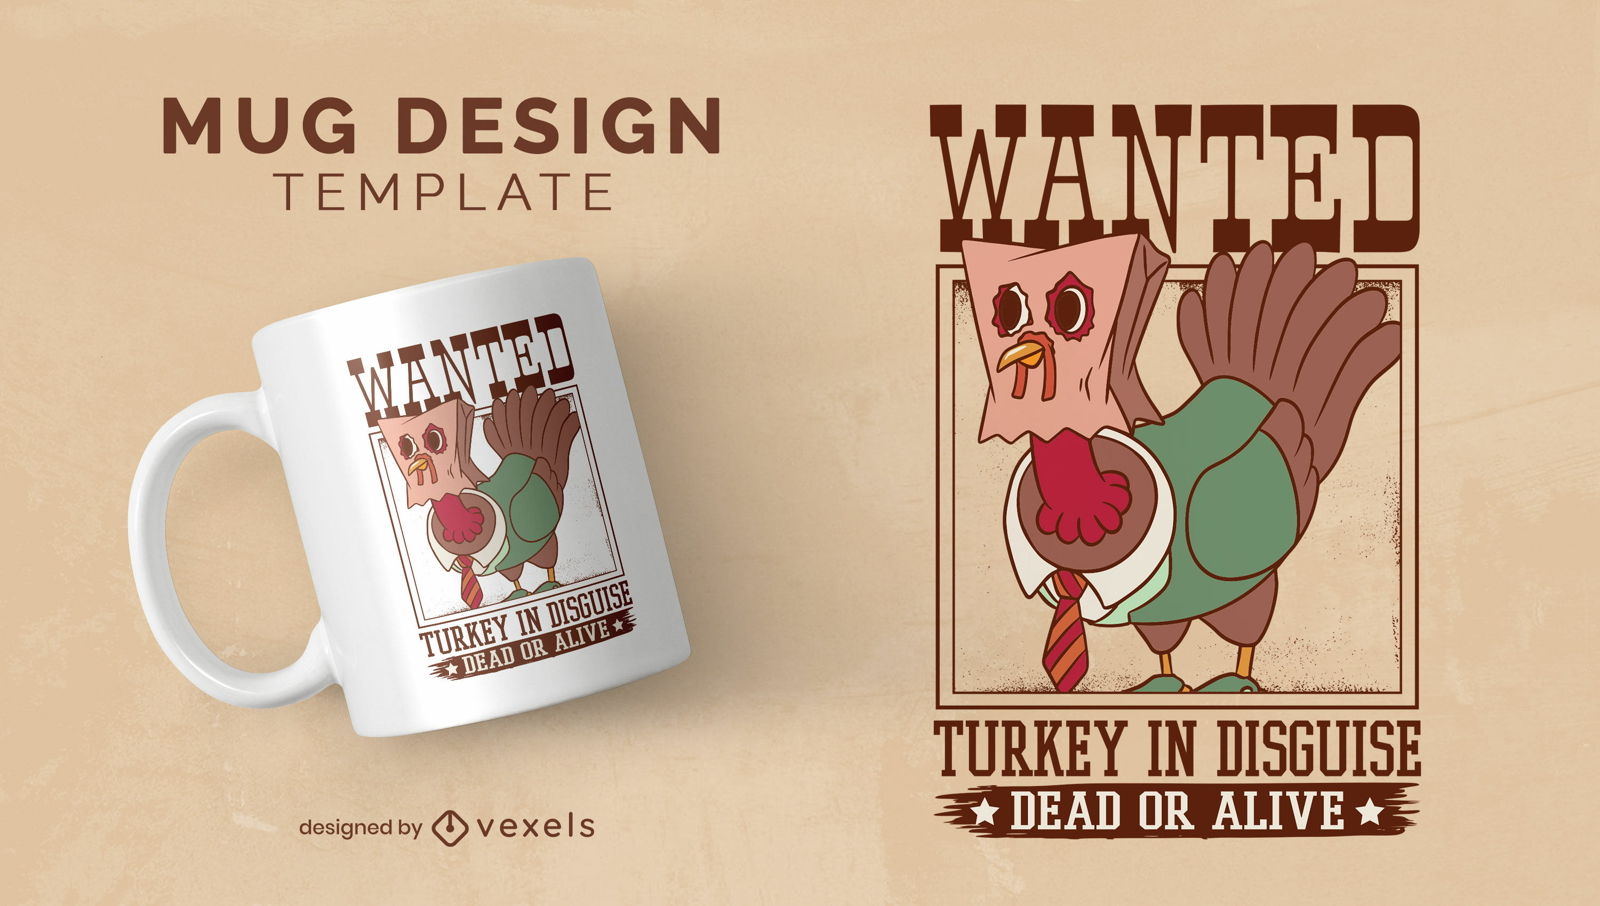 Wanted turkey in disguise mug design template